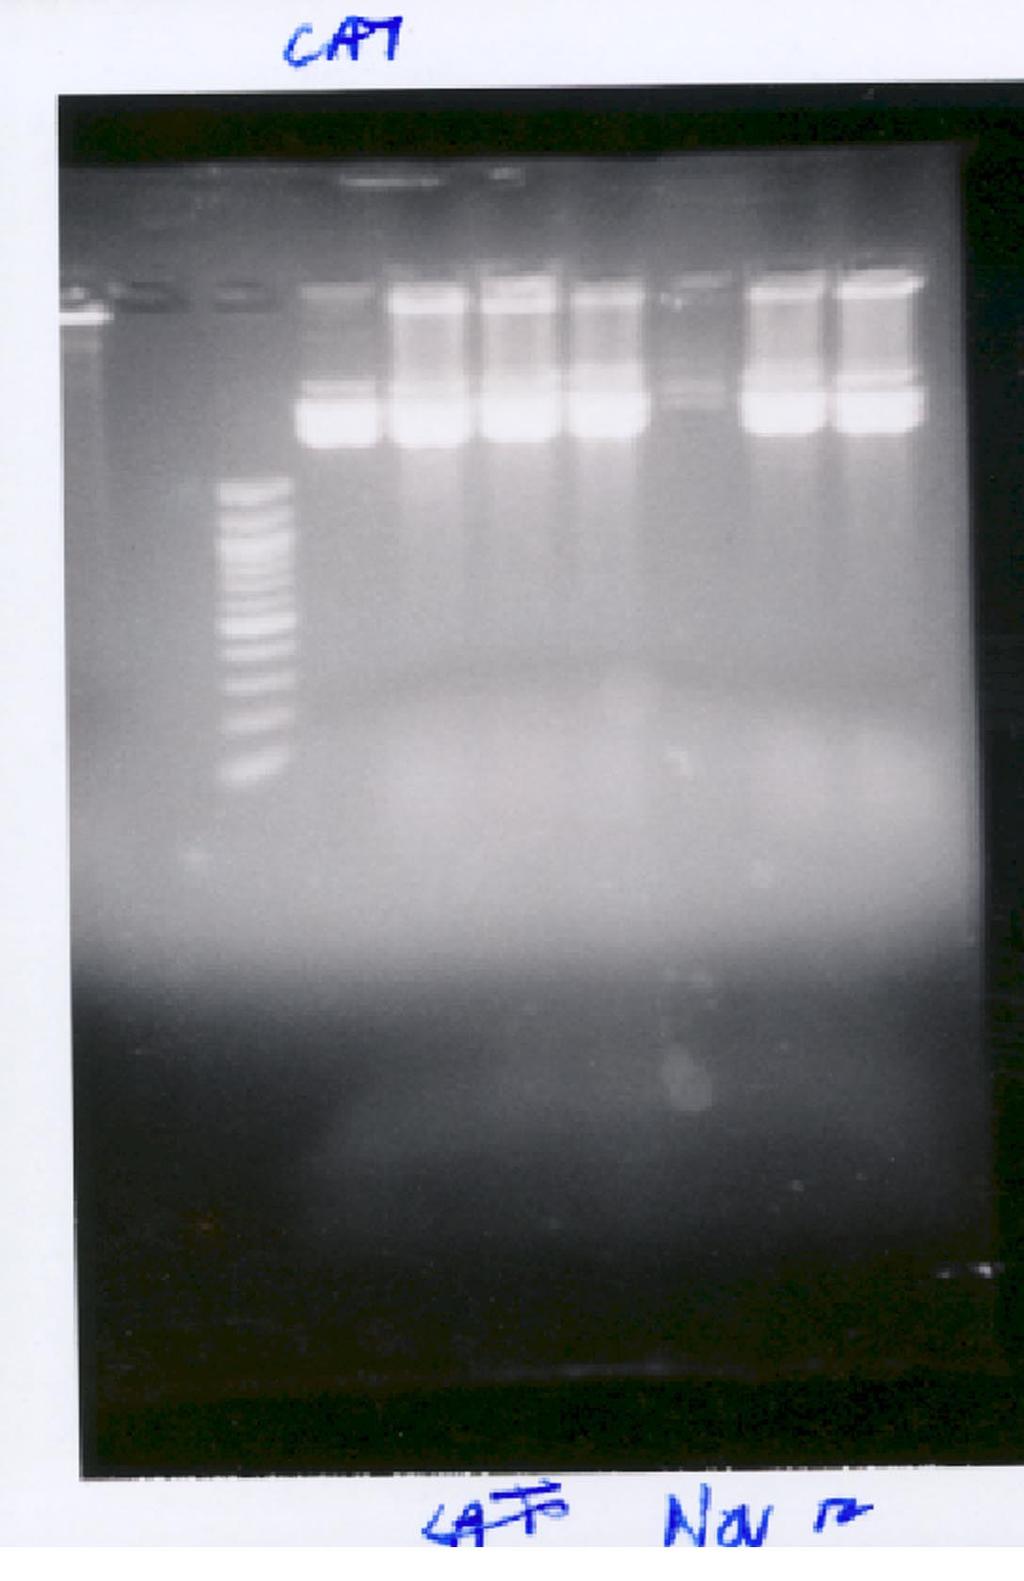 As you can see, lane 2 and 3 (GL3 mutant and positive control, respectively) yield the same size DNA fragments when cut with BamH1.